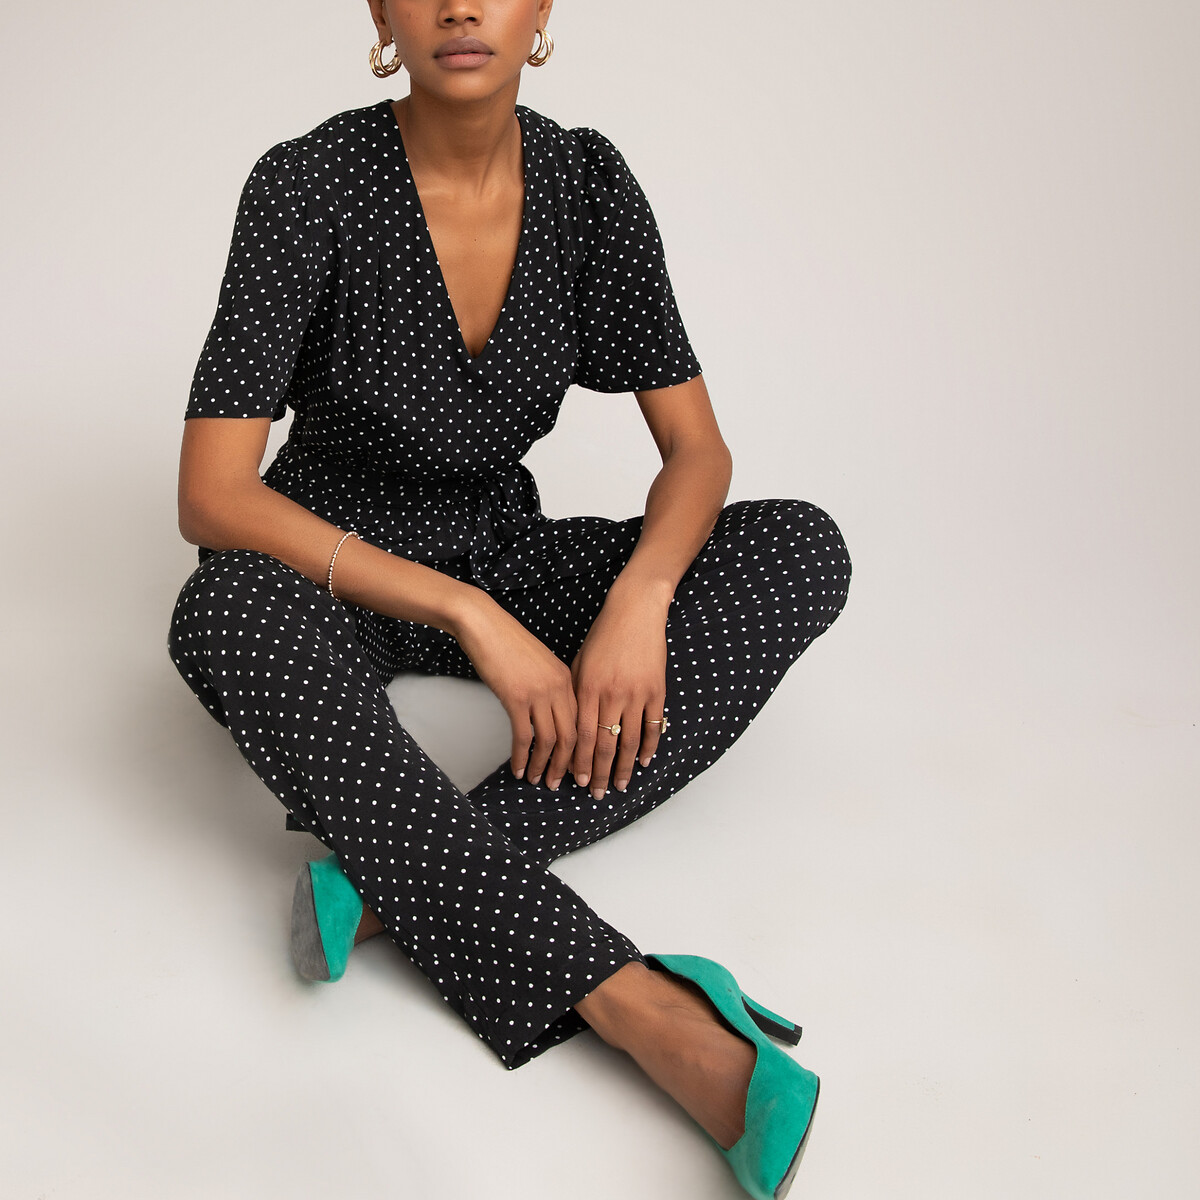 Polka Dot Jumpsuit With V Neck Length 30 5 Black With White Polka Dots La Redoute Collections La Redoute